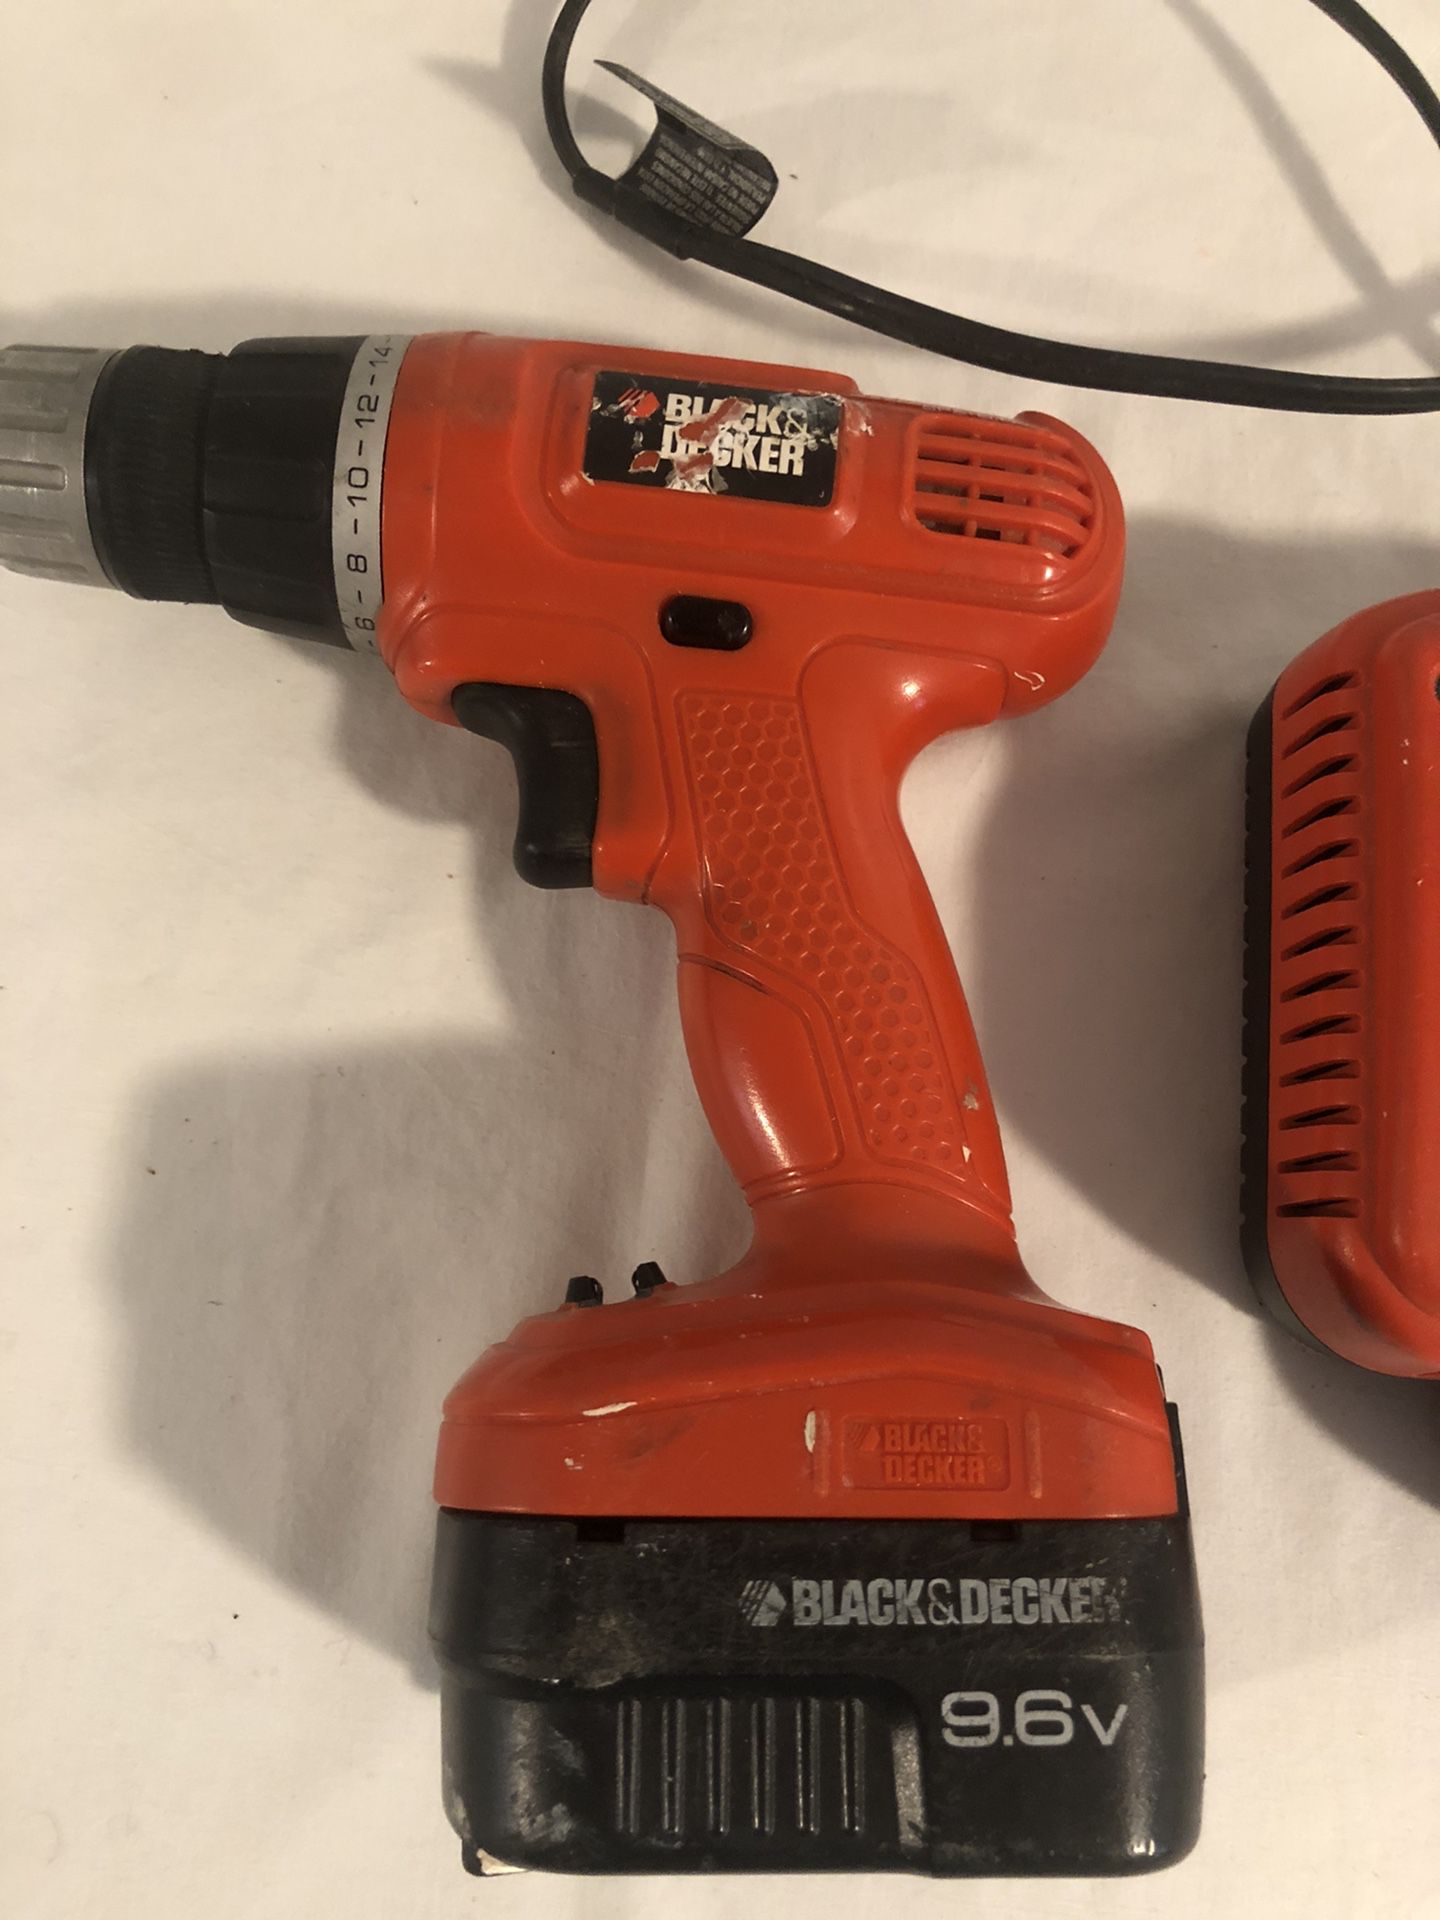 Black & Decker 9.5v Drill Driver with battery charger for Sale in Orange,  CT - OfferUp